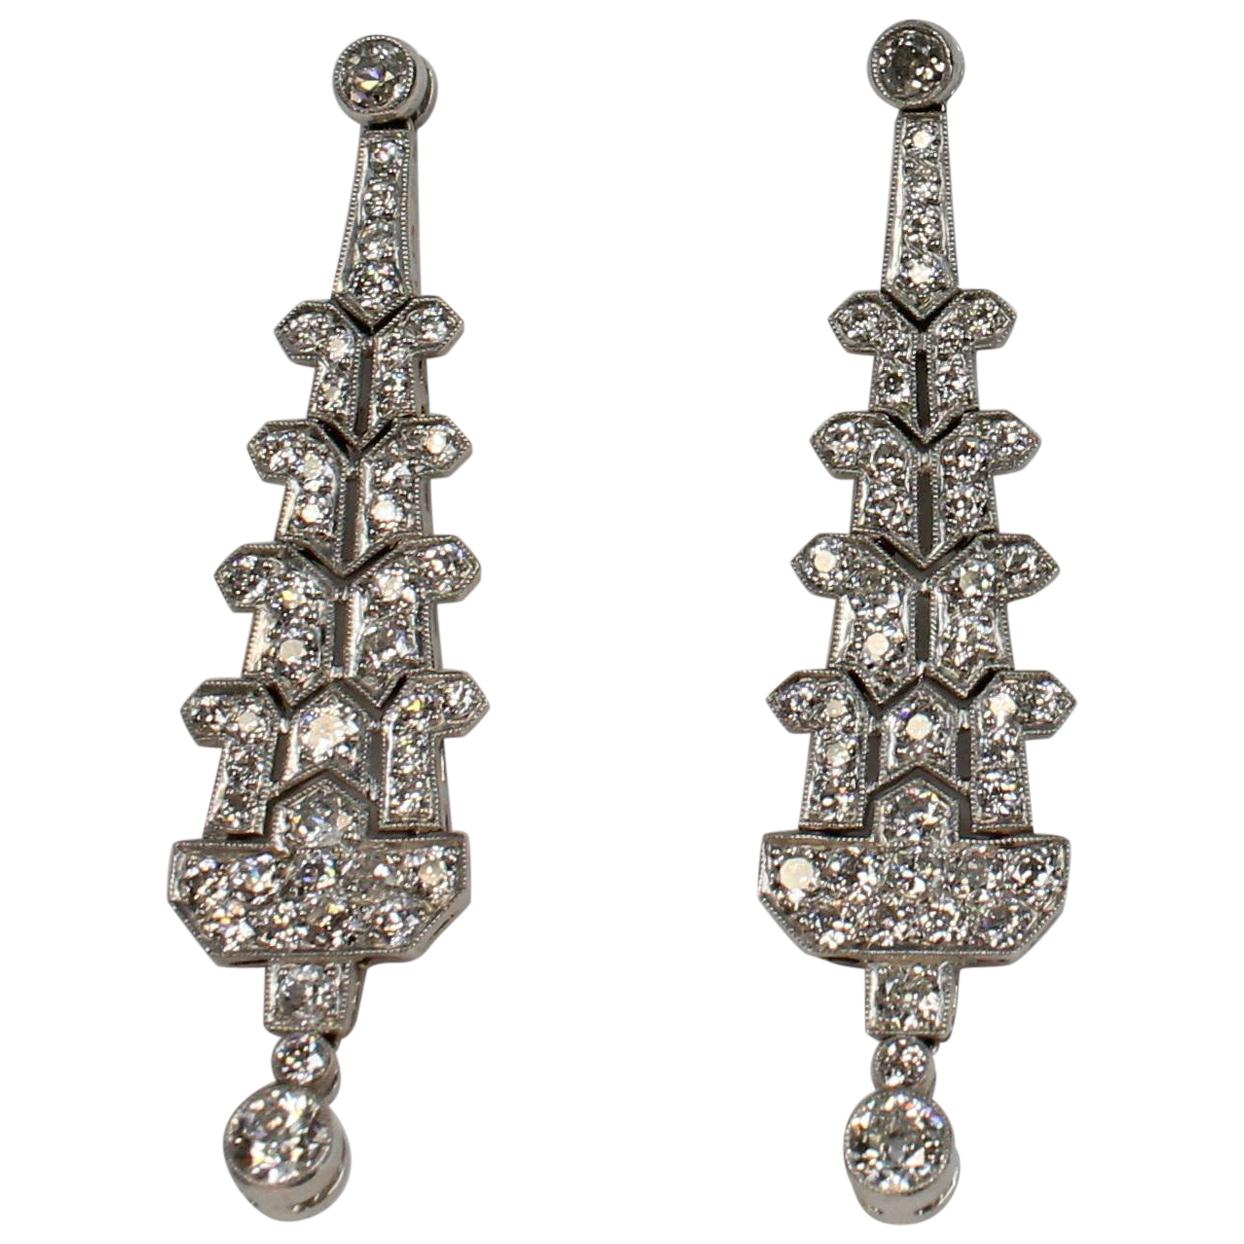  5.0 Carat Total Weight Diamond Dangle Earrings Set in Platinum For Sale